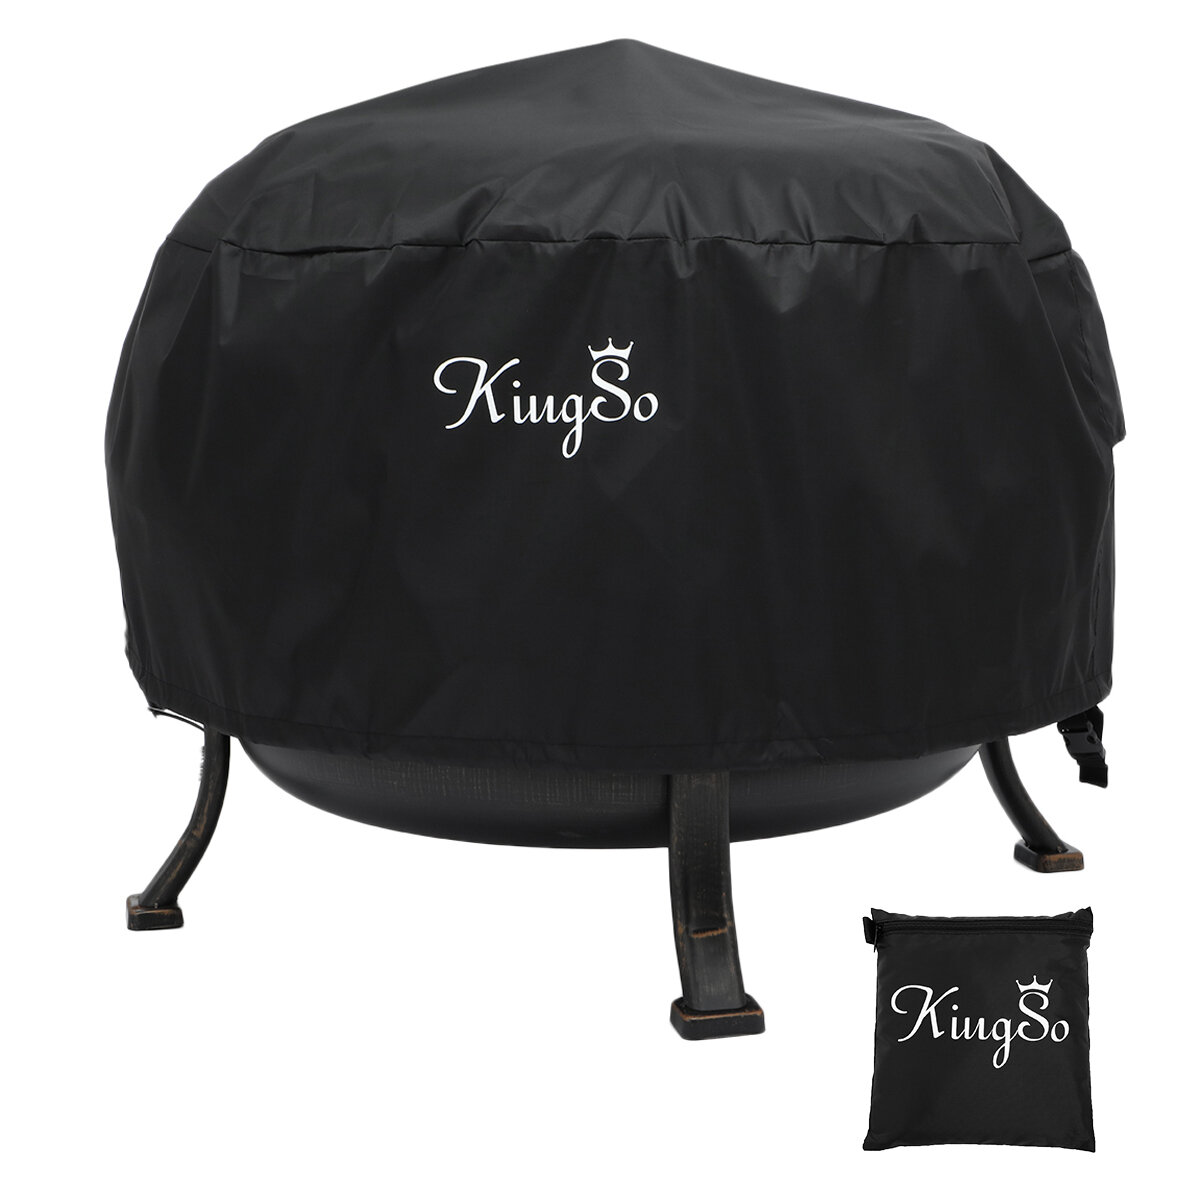 Kingso 36 Inch Round Fire Pit Cover, Home Depot Gas Fire Pit Covers